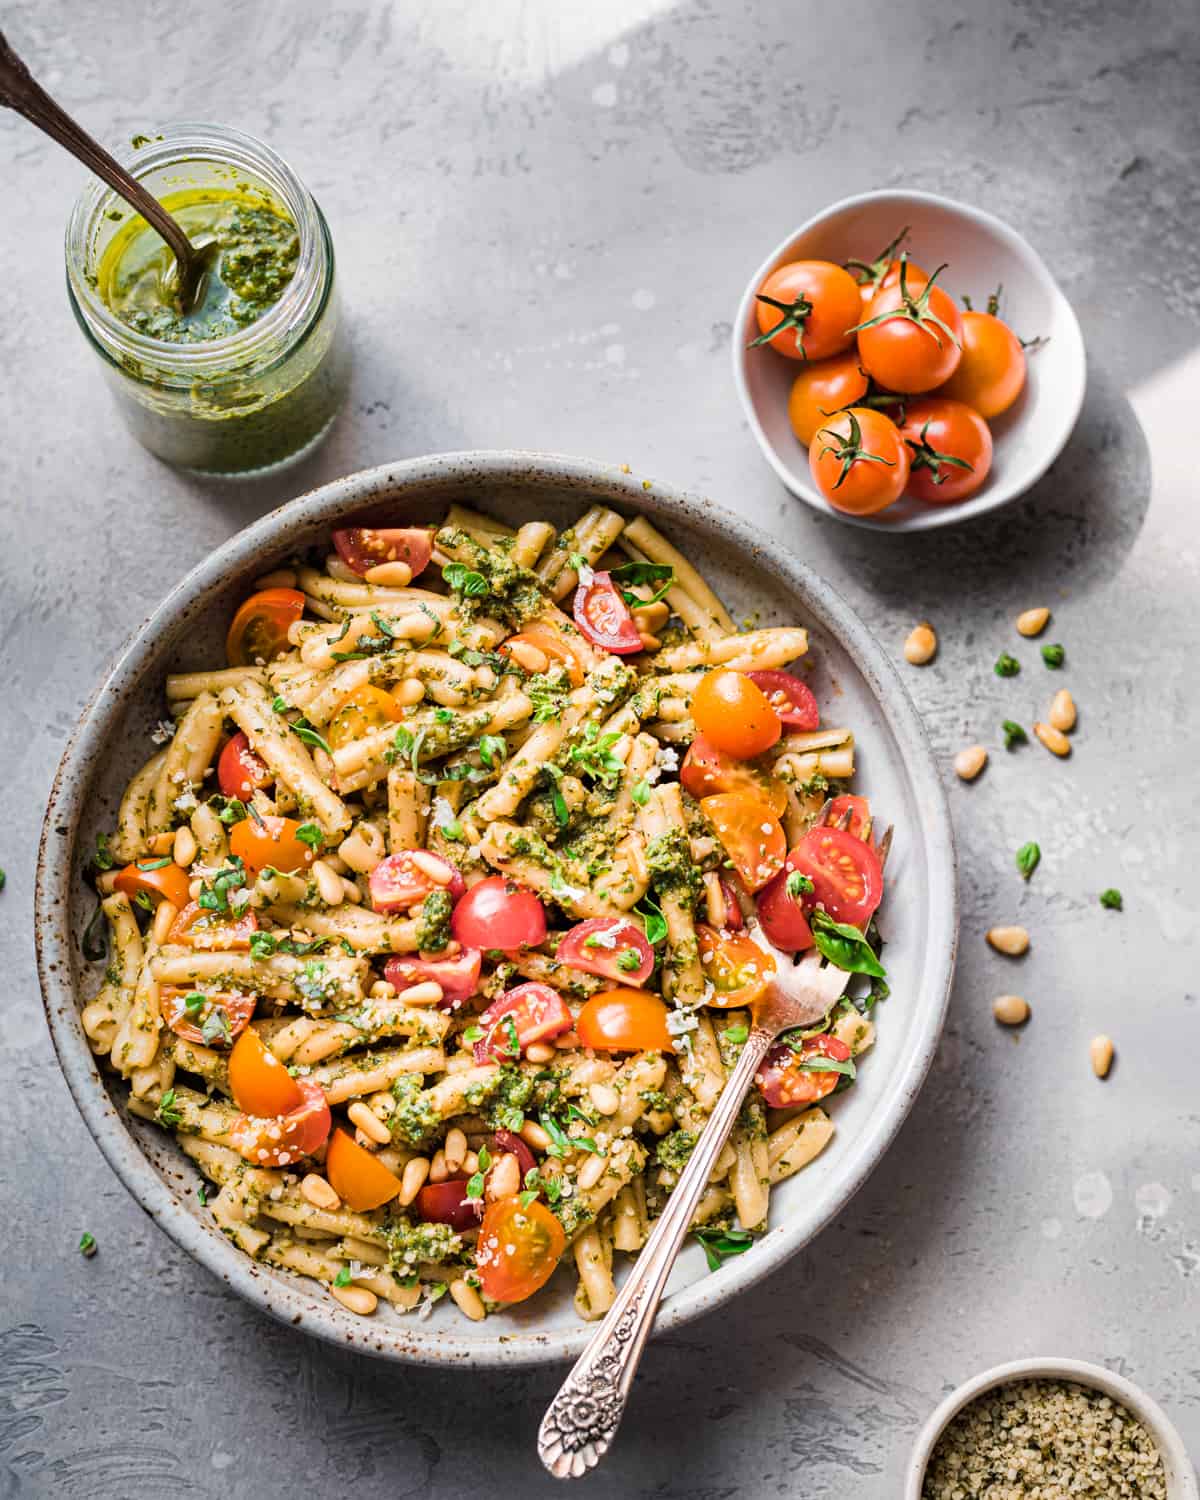 Overhead view of pesto pasta with tomatoes in a bowl on a grey table.